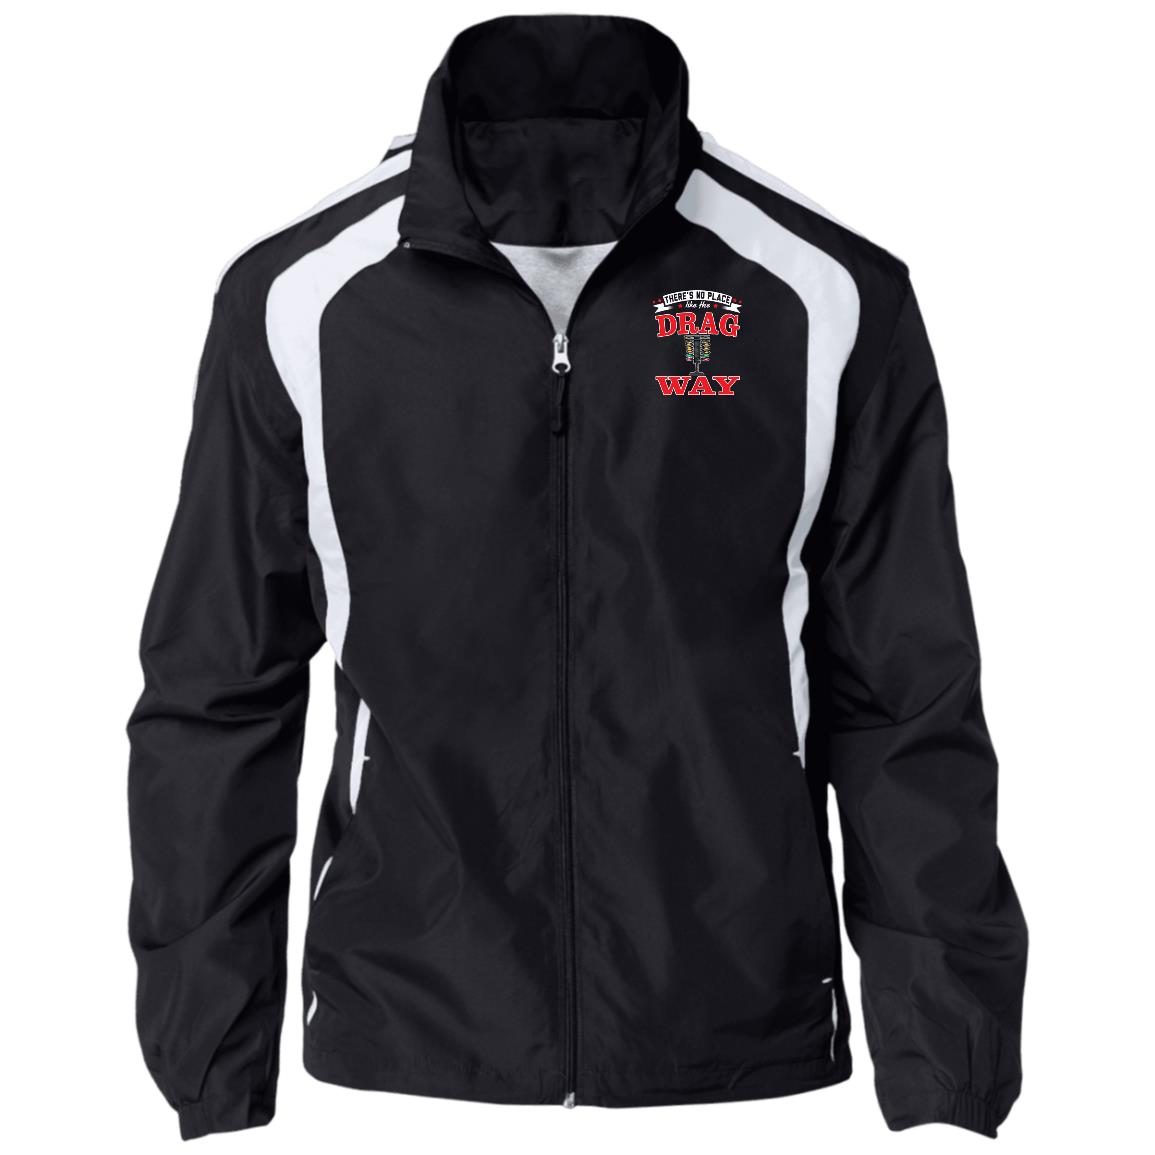 There's No Place Like The Dragway Jersey-Lined Raglan Jacket